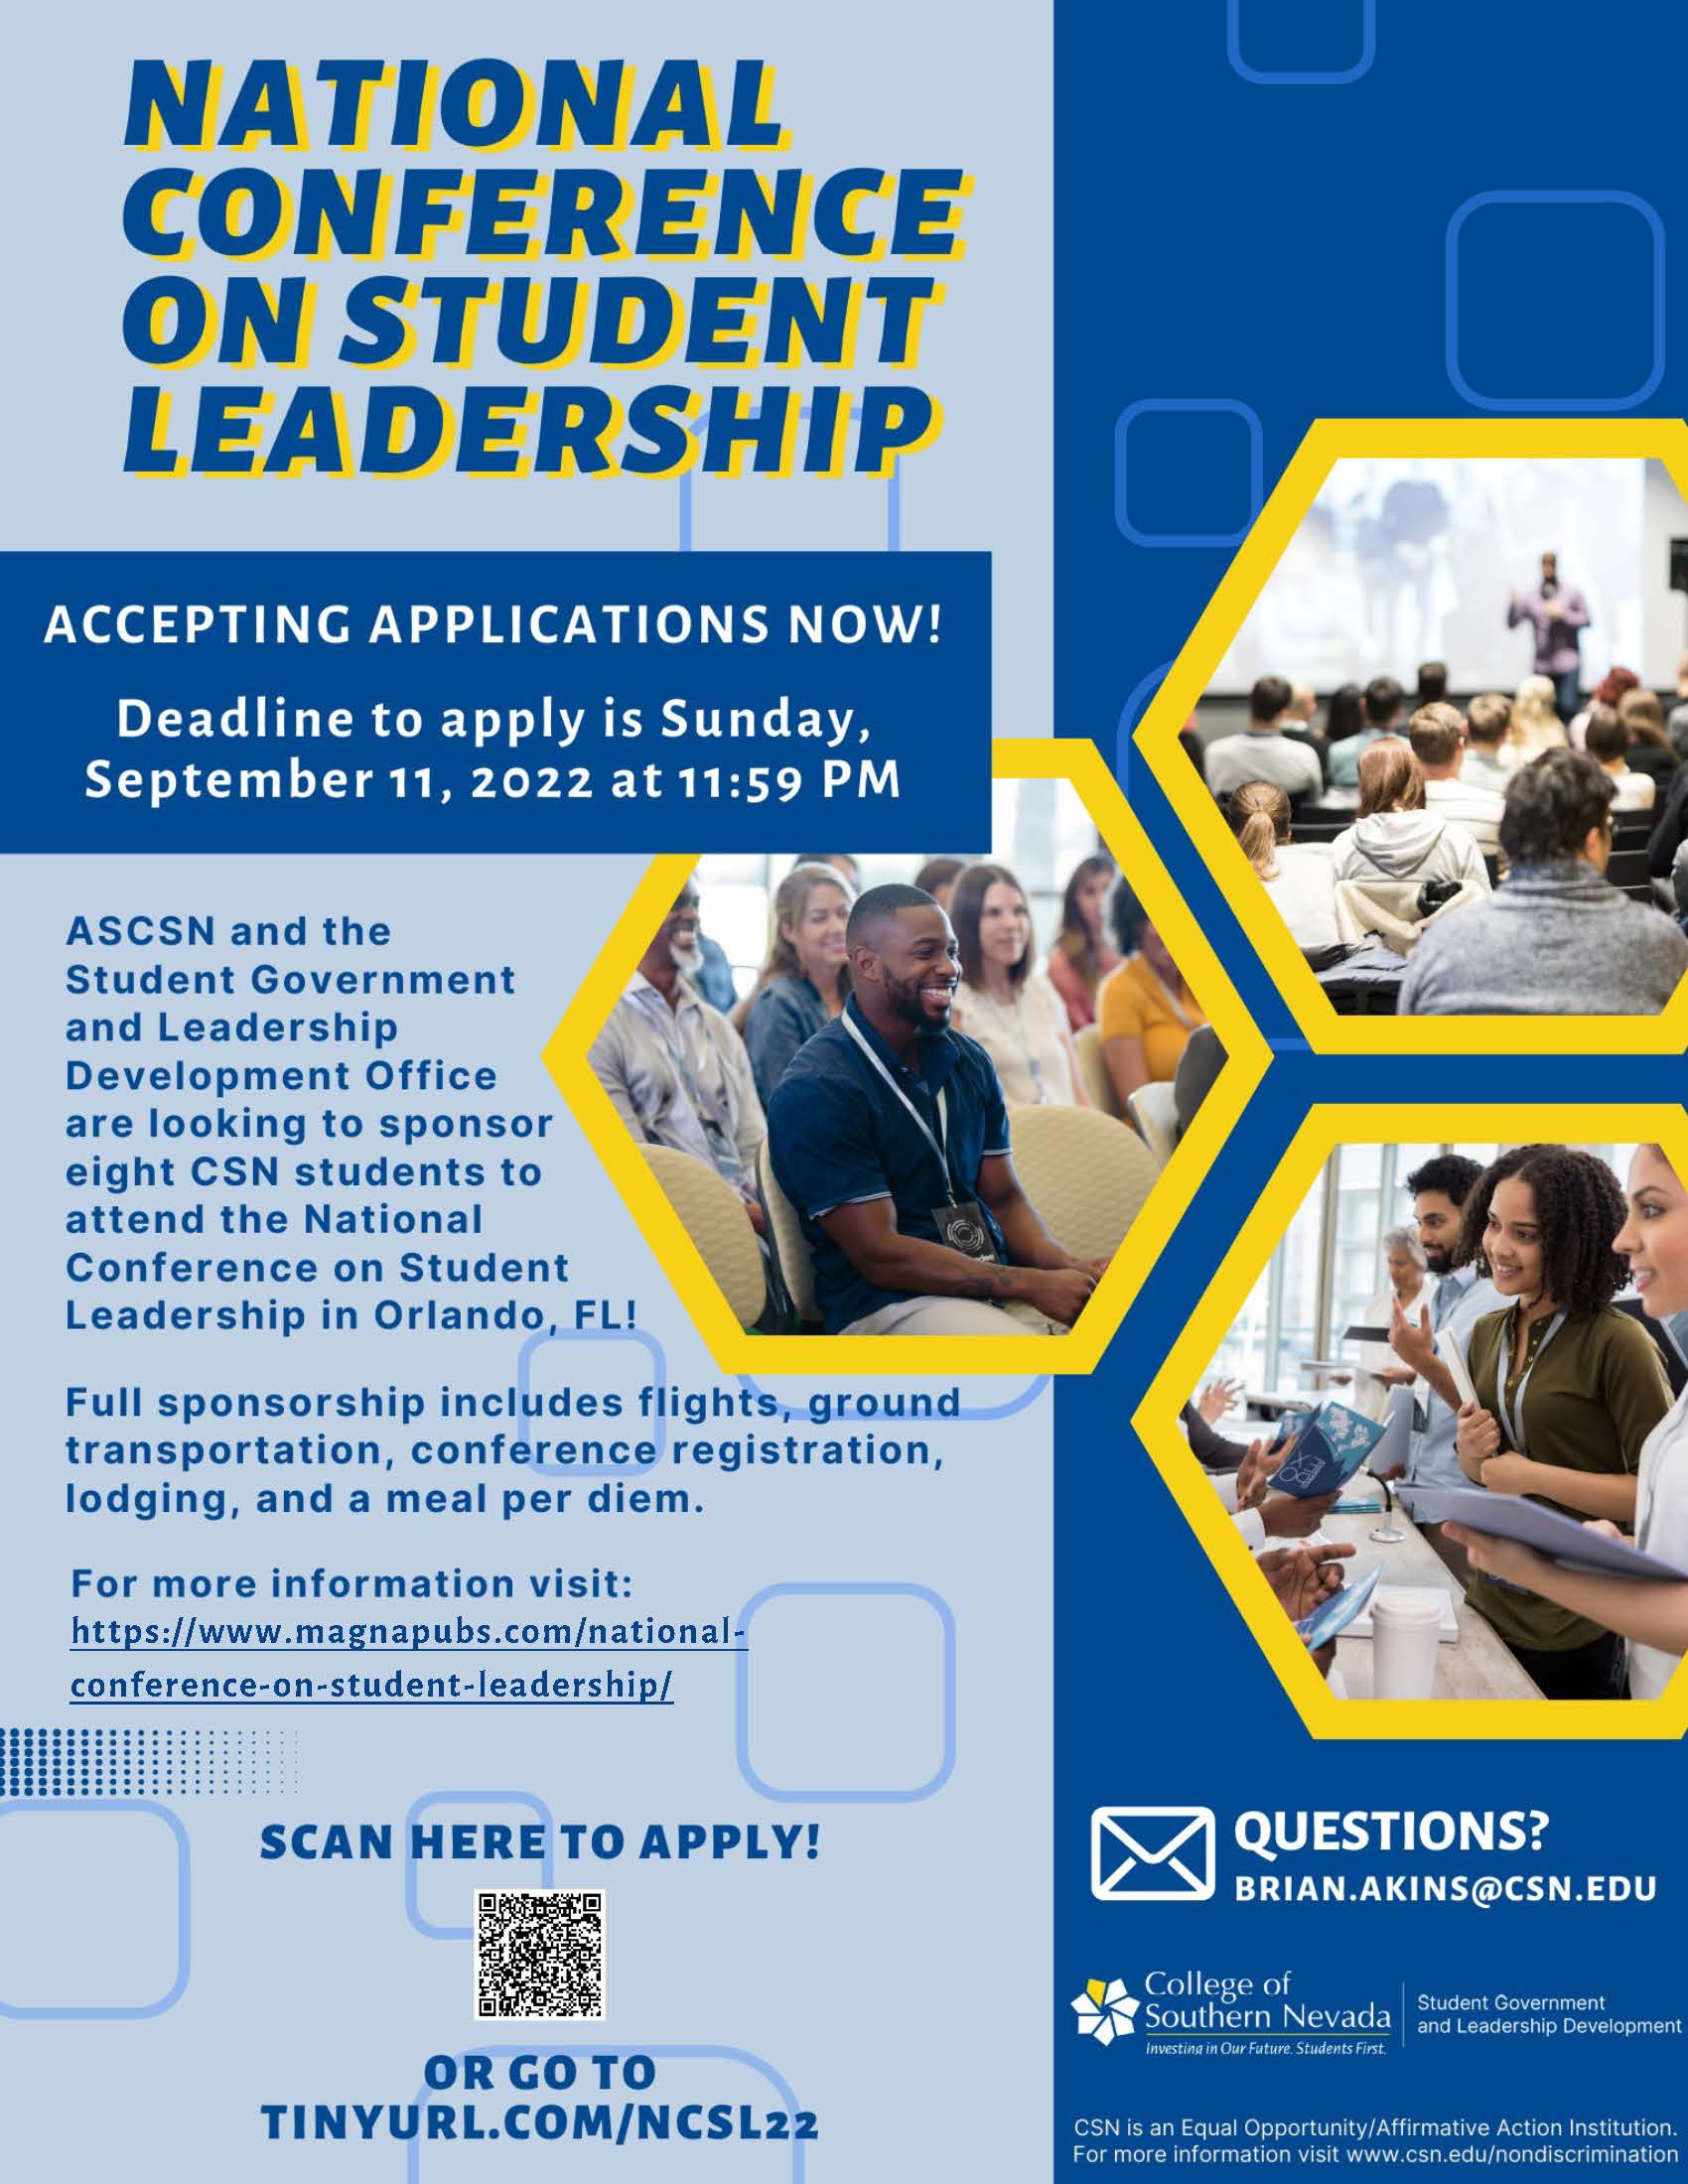 National Conference on Student Leadership is accepting applications now!